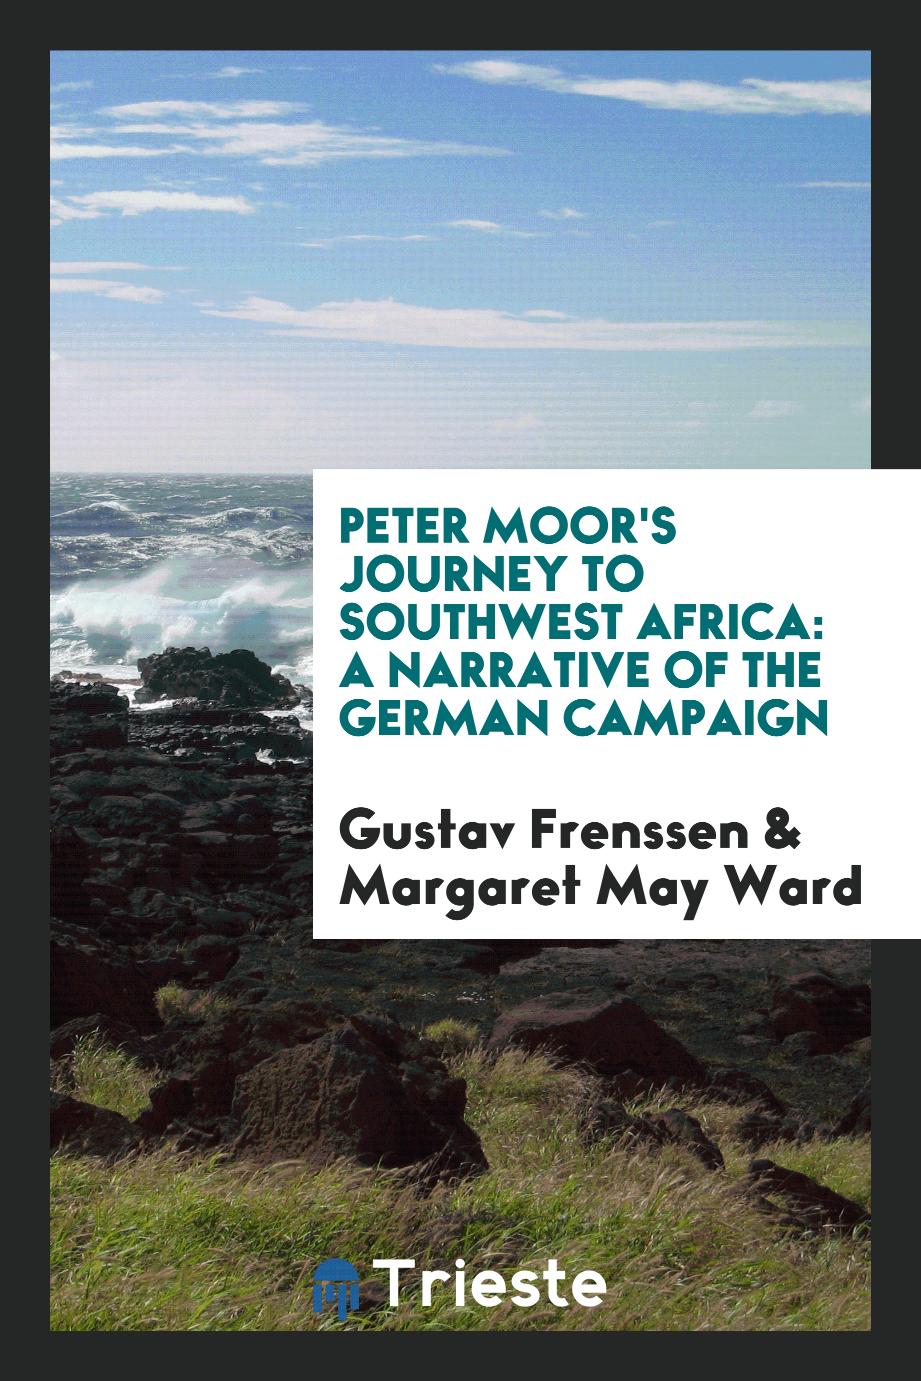 Peter Moor's journey to Southwest Africa: a narrative of the German campaign